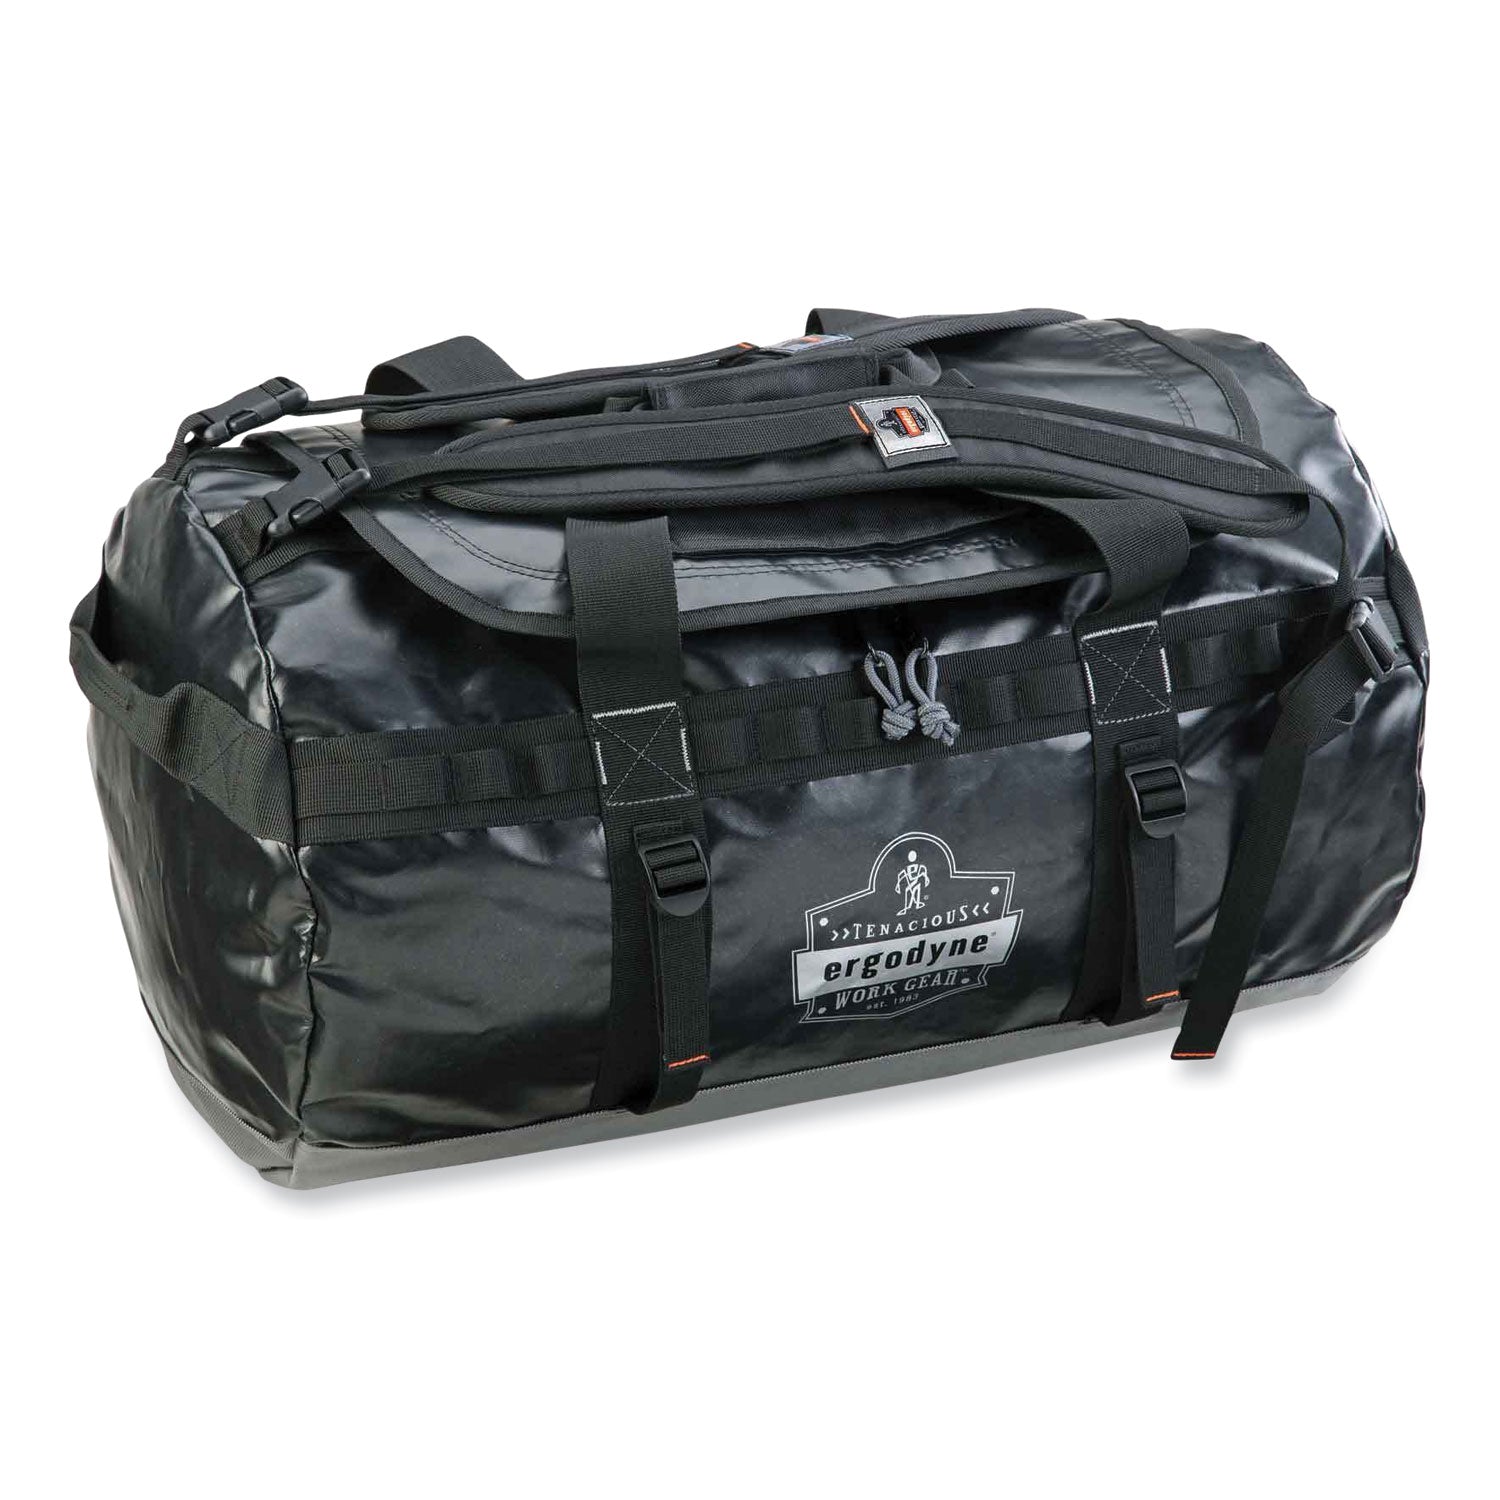 arsenal-5030-water-resistant-duffel-bag-small-135-x-235-x-135-black-ships-in-1-3-business-days_ego13030 - 2